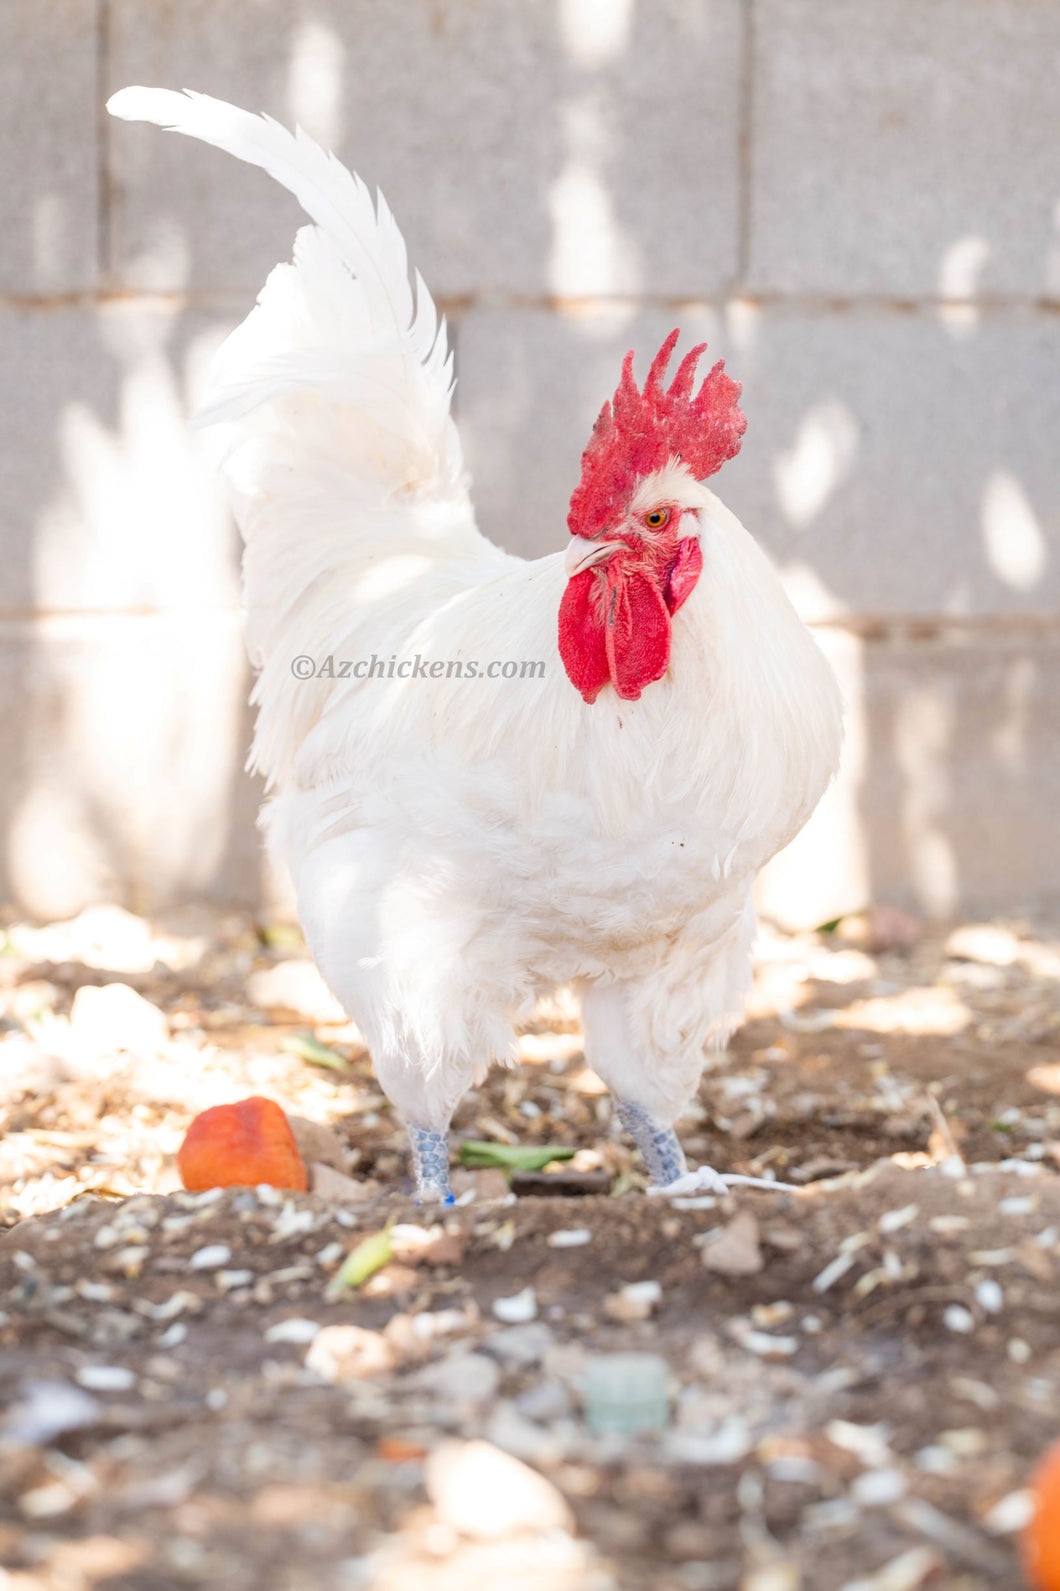 Breeder Cull - Adult Rooster